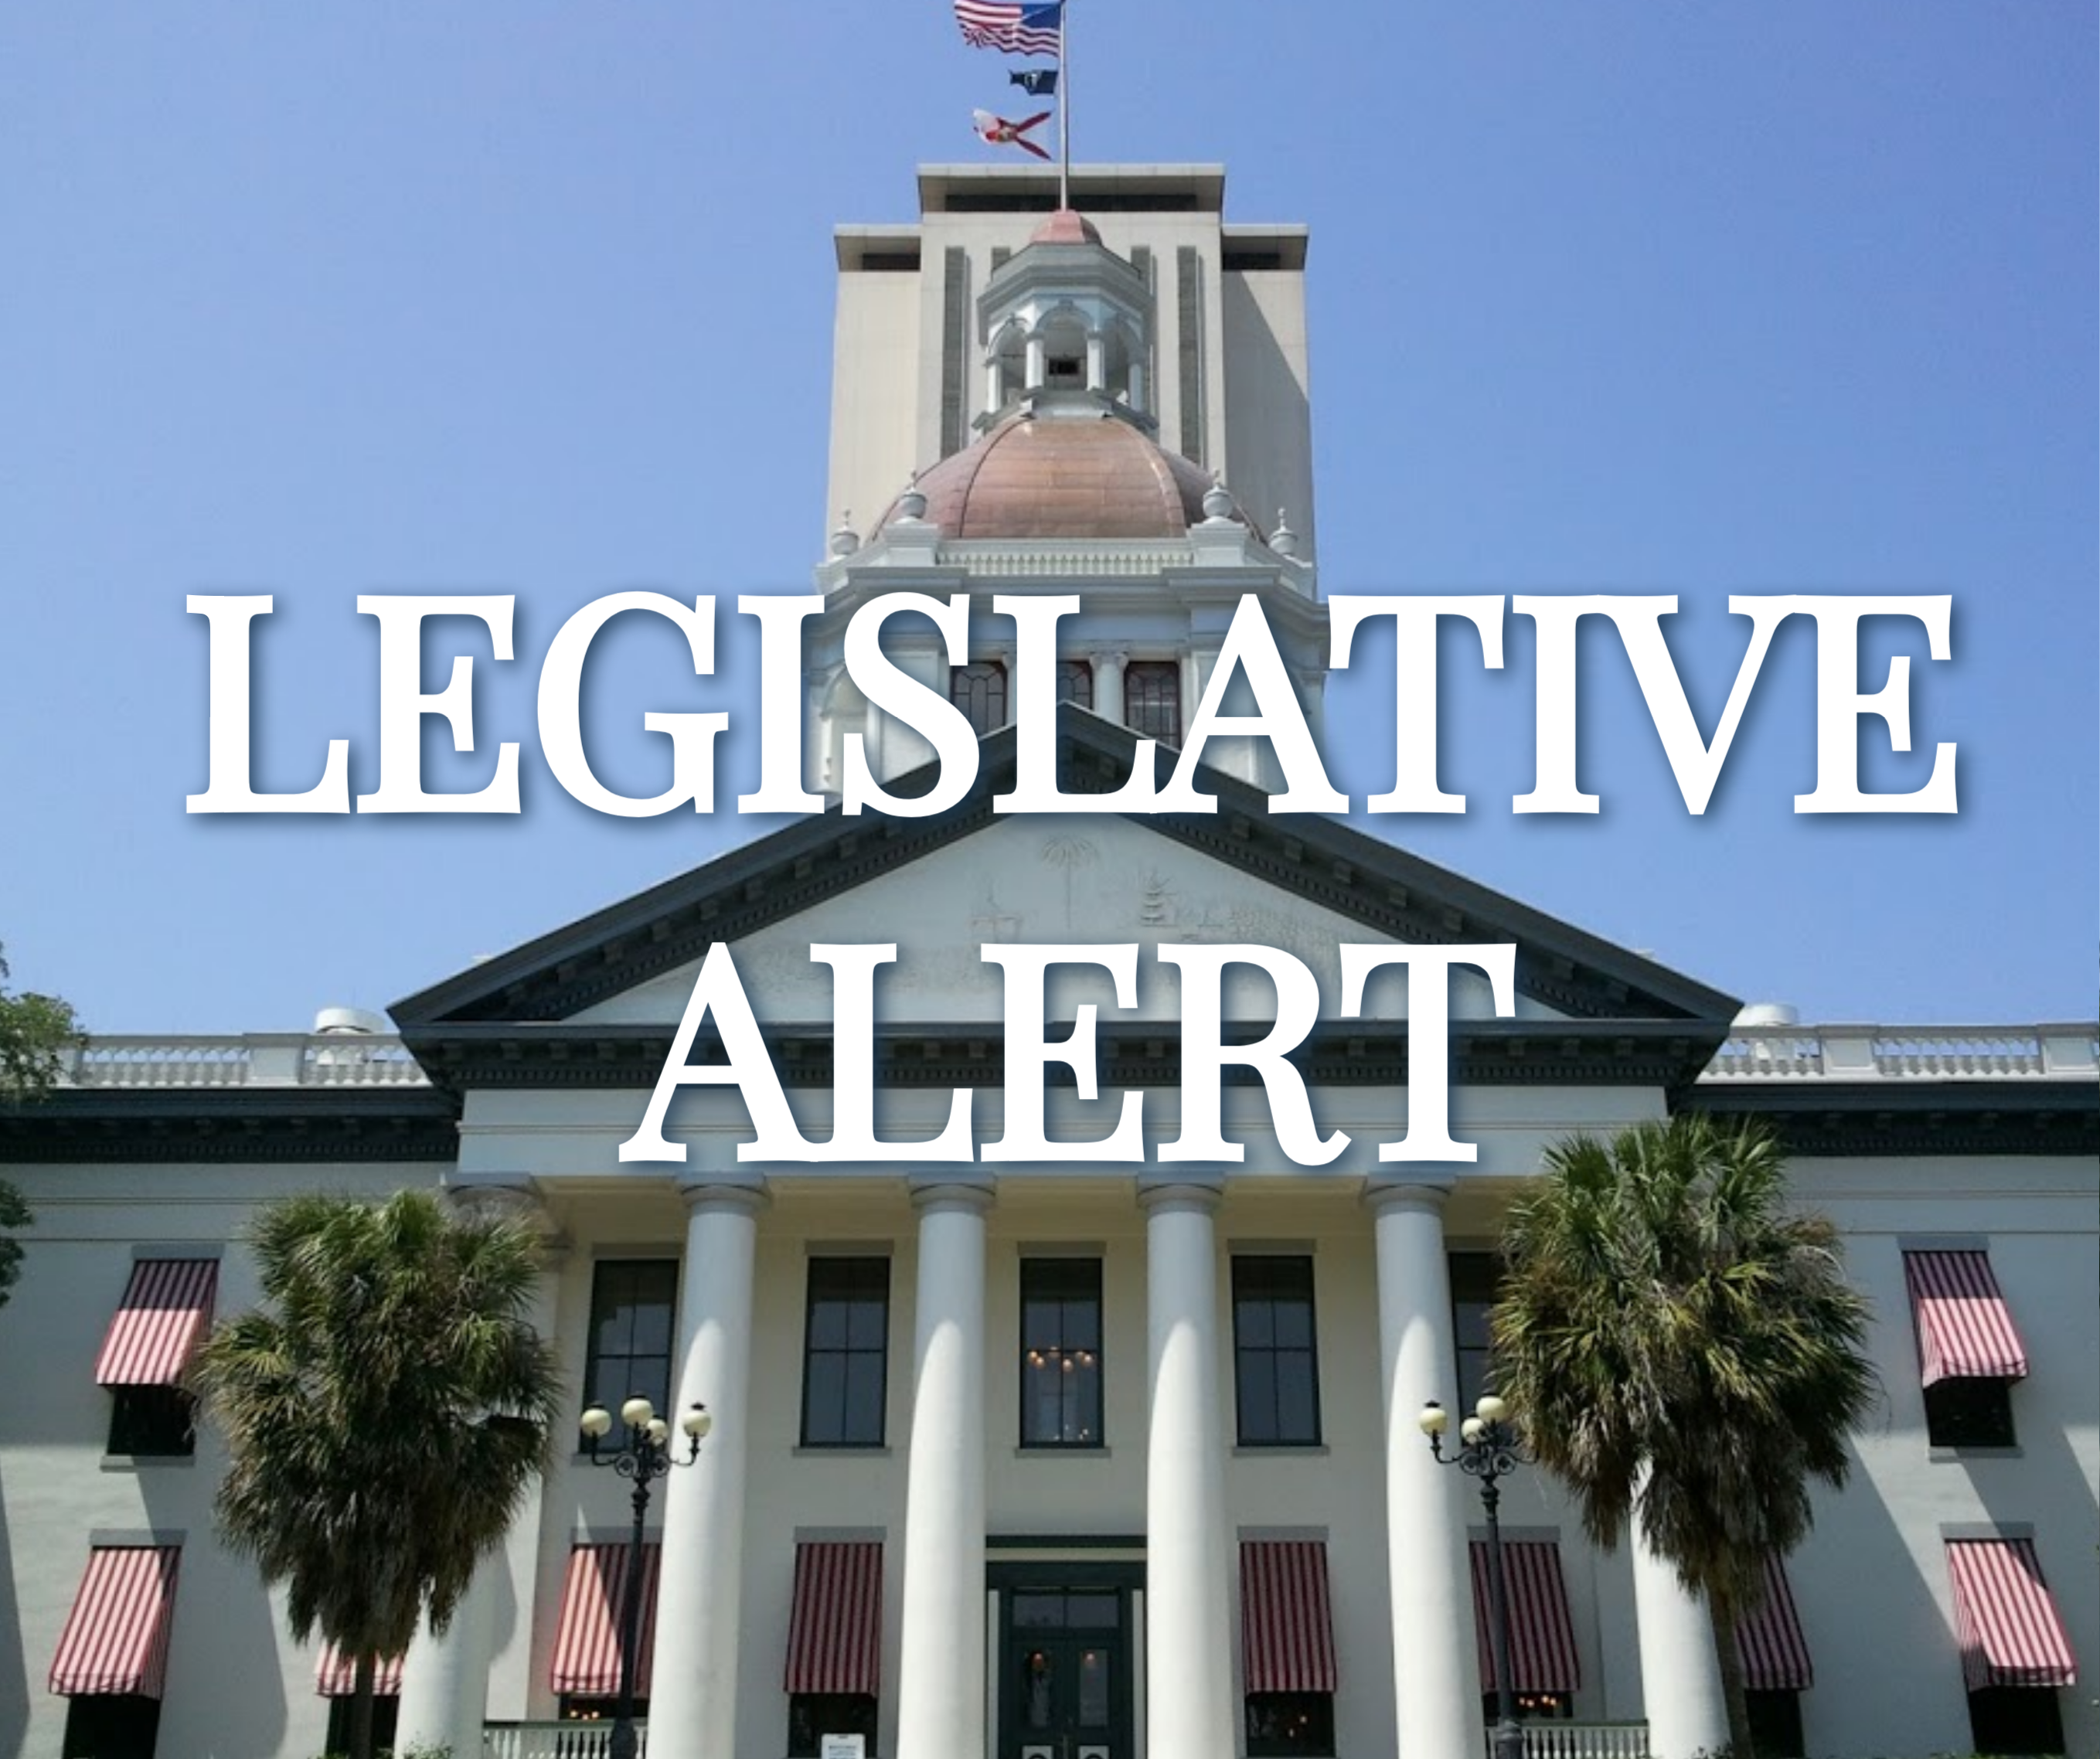 BREAKING NEWS: Florida’s Senate Health Policy Committee voted unanimously in favor of assisted living facility deregulation (SB402). Image